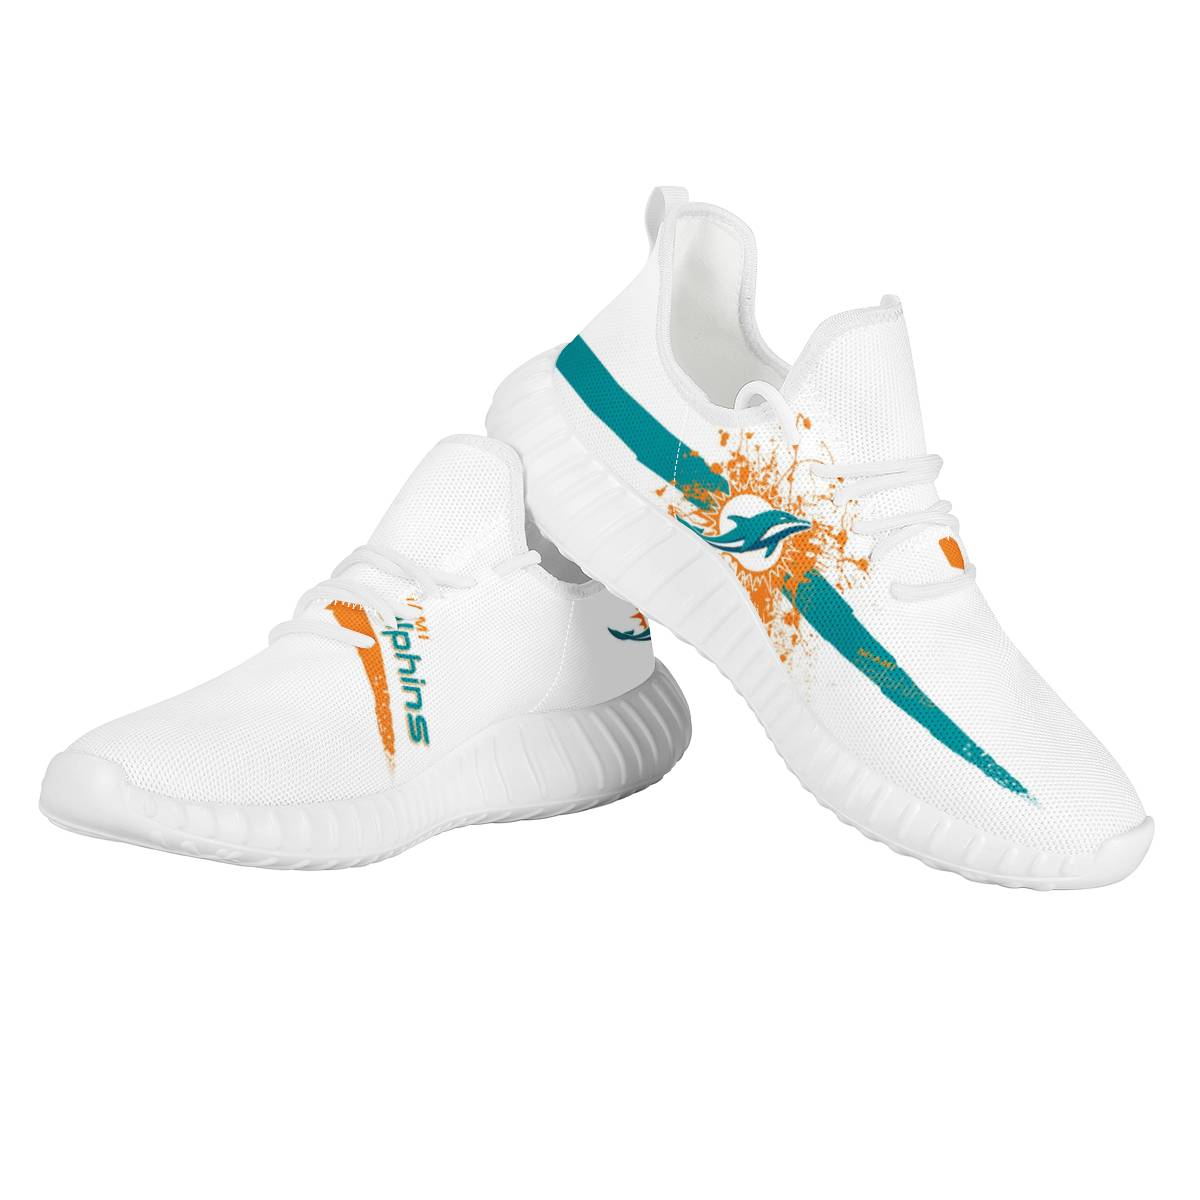 Men's Miami Dolphins Mesh Knit Sneakers/Shoes 002